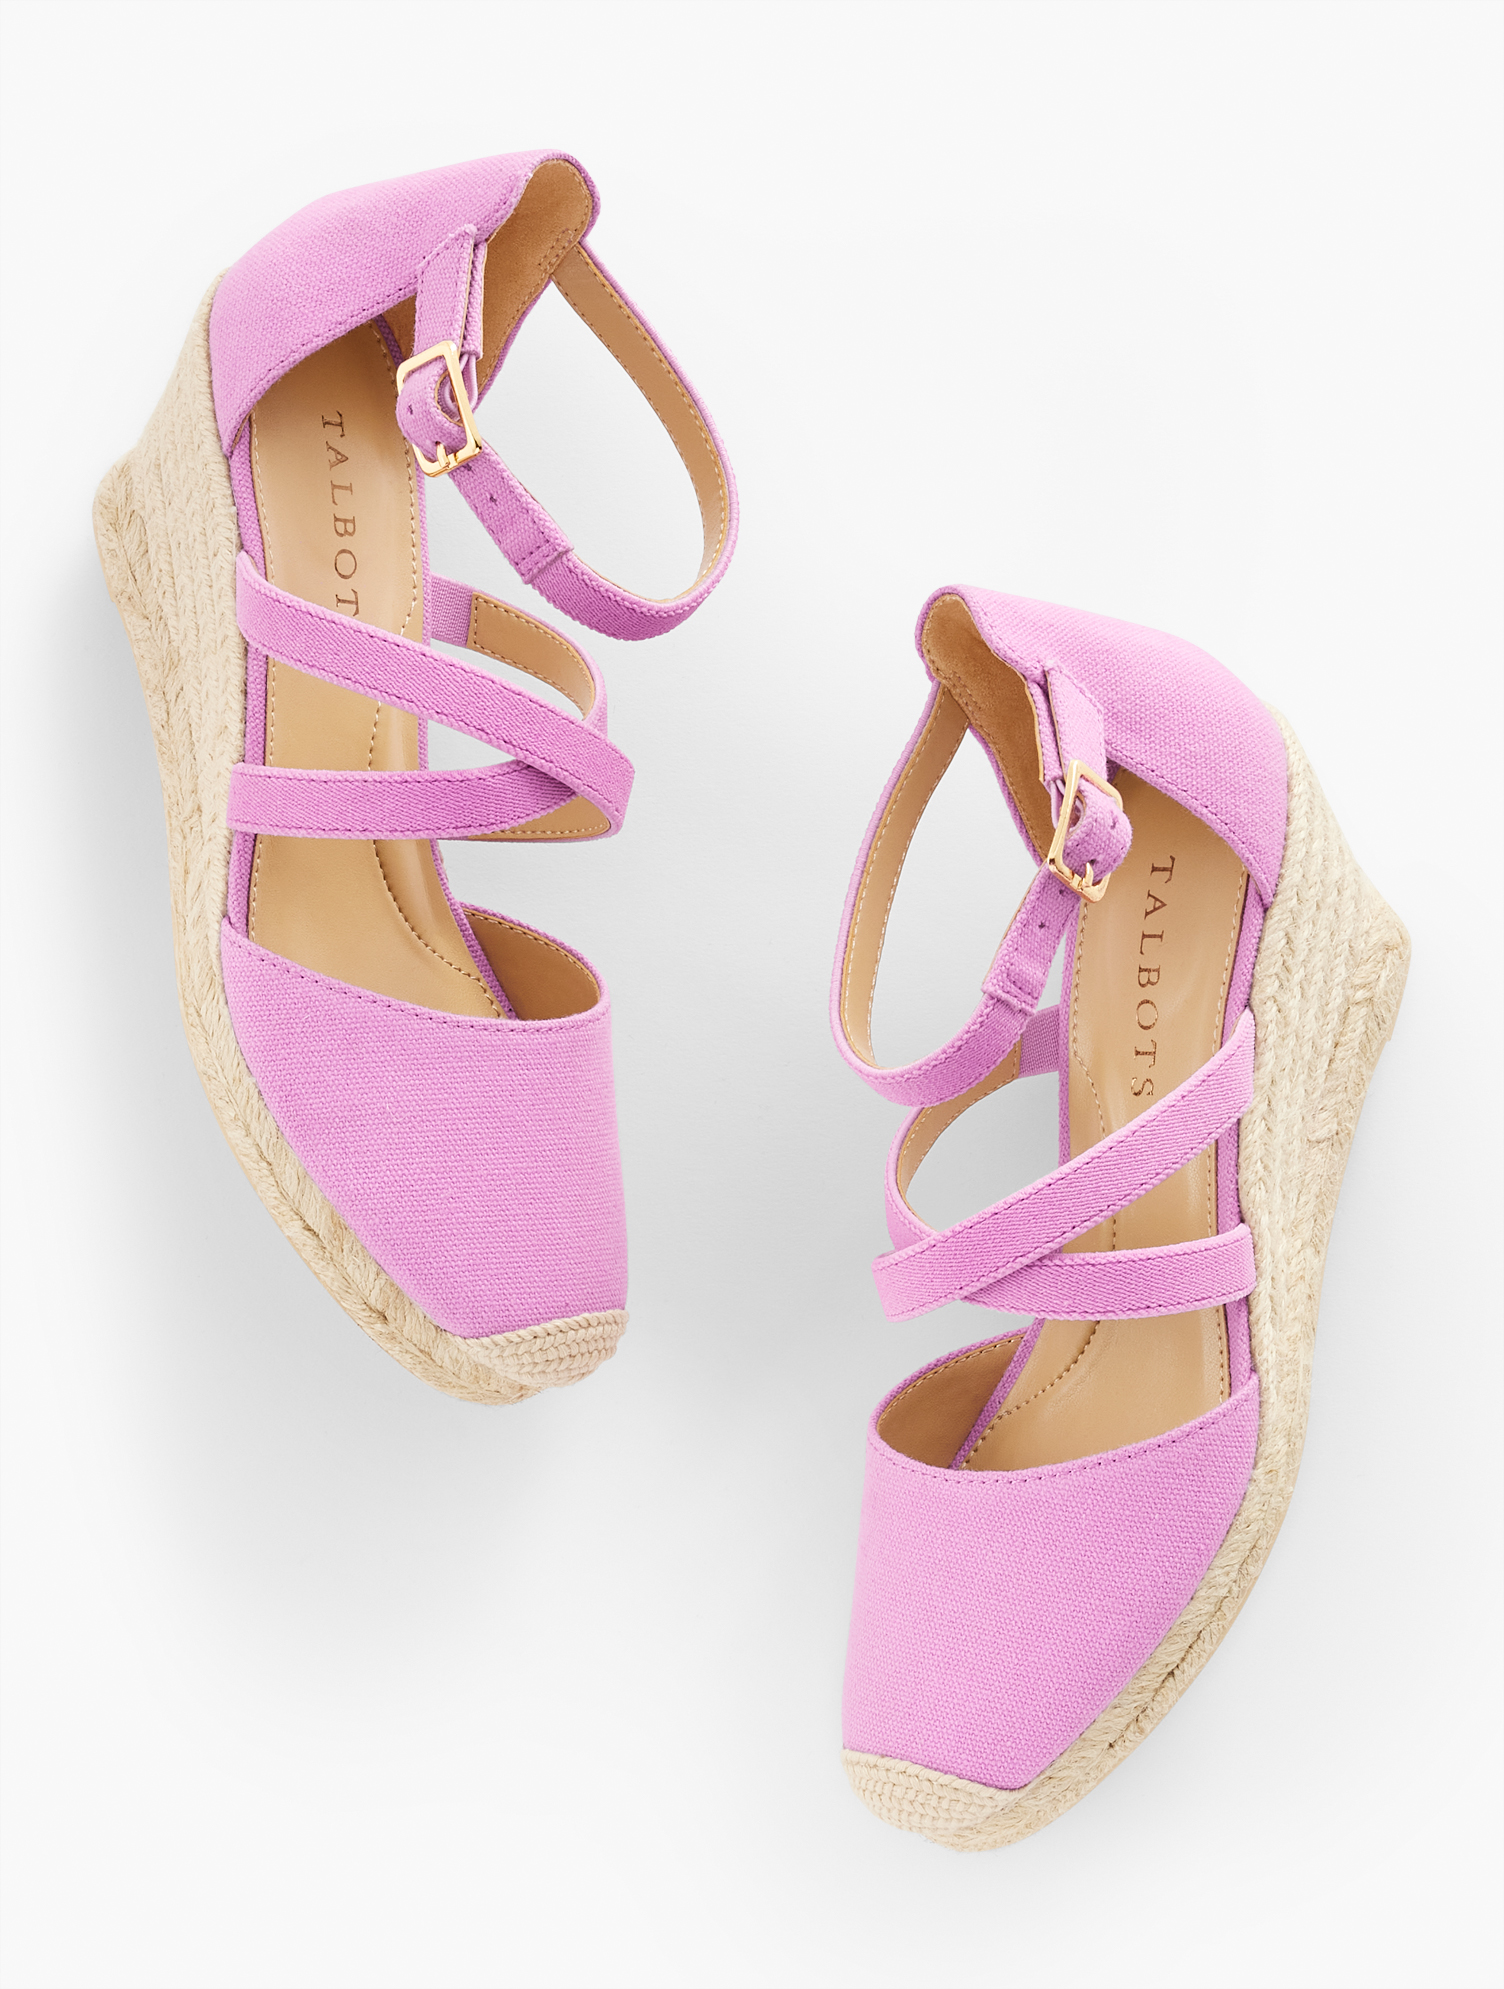 Talbots Lyndsay Strappy Canvas Espadrille Wedges - Orchid Bloom - 7m - 100% Cotton